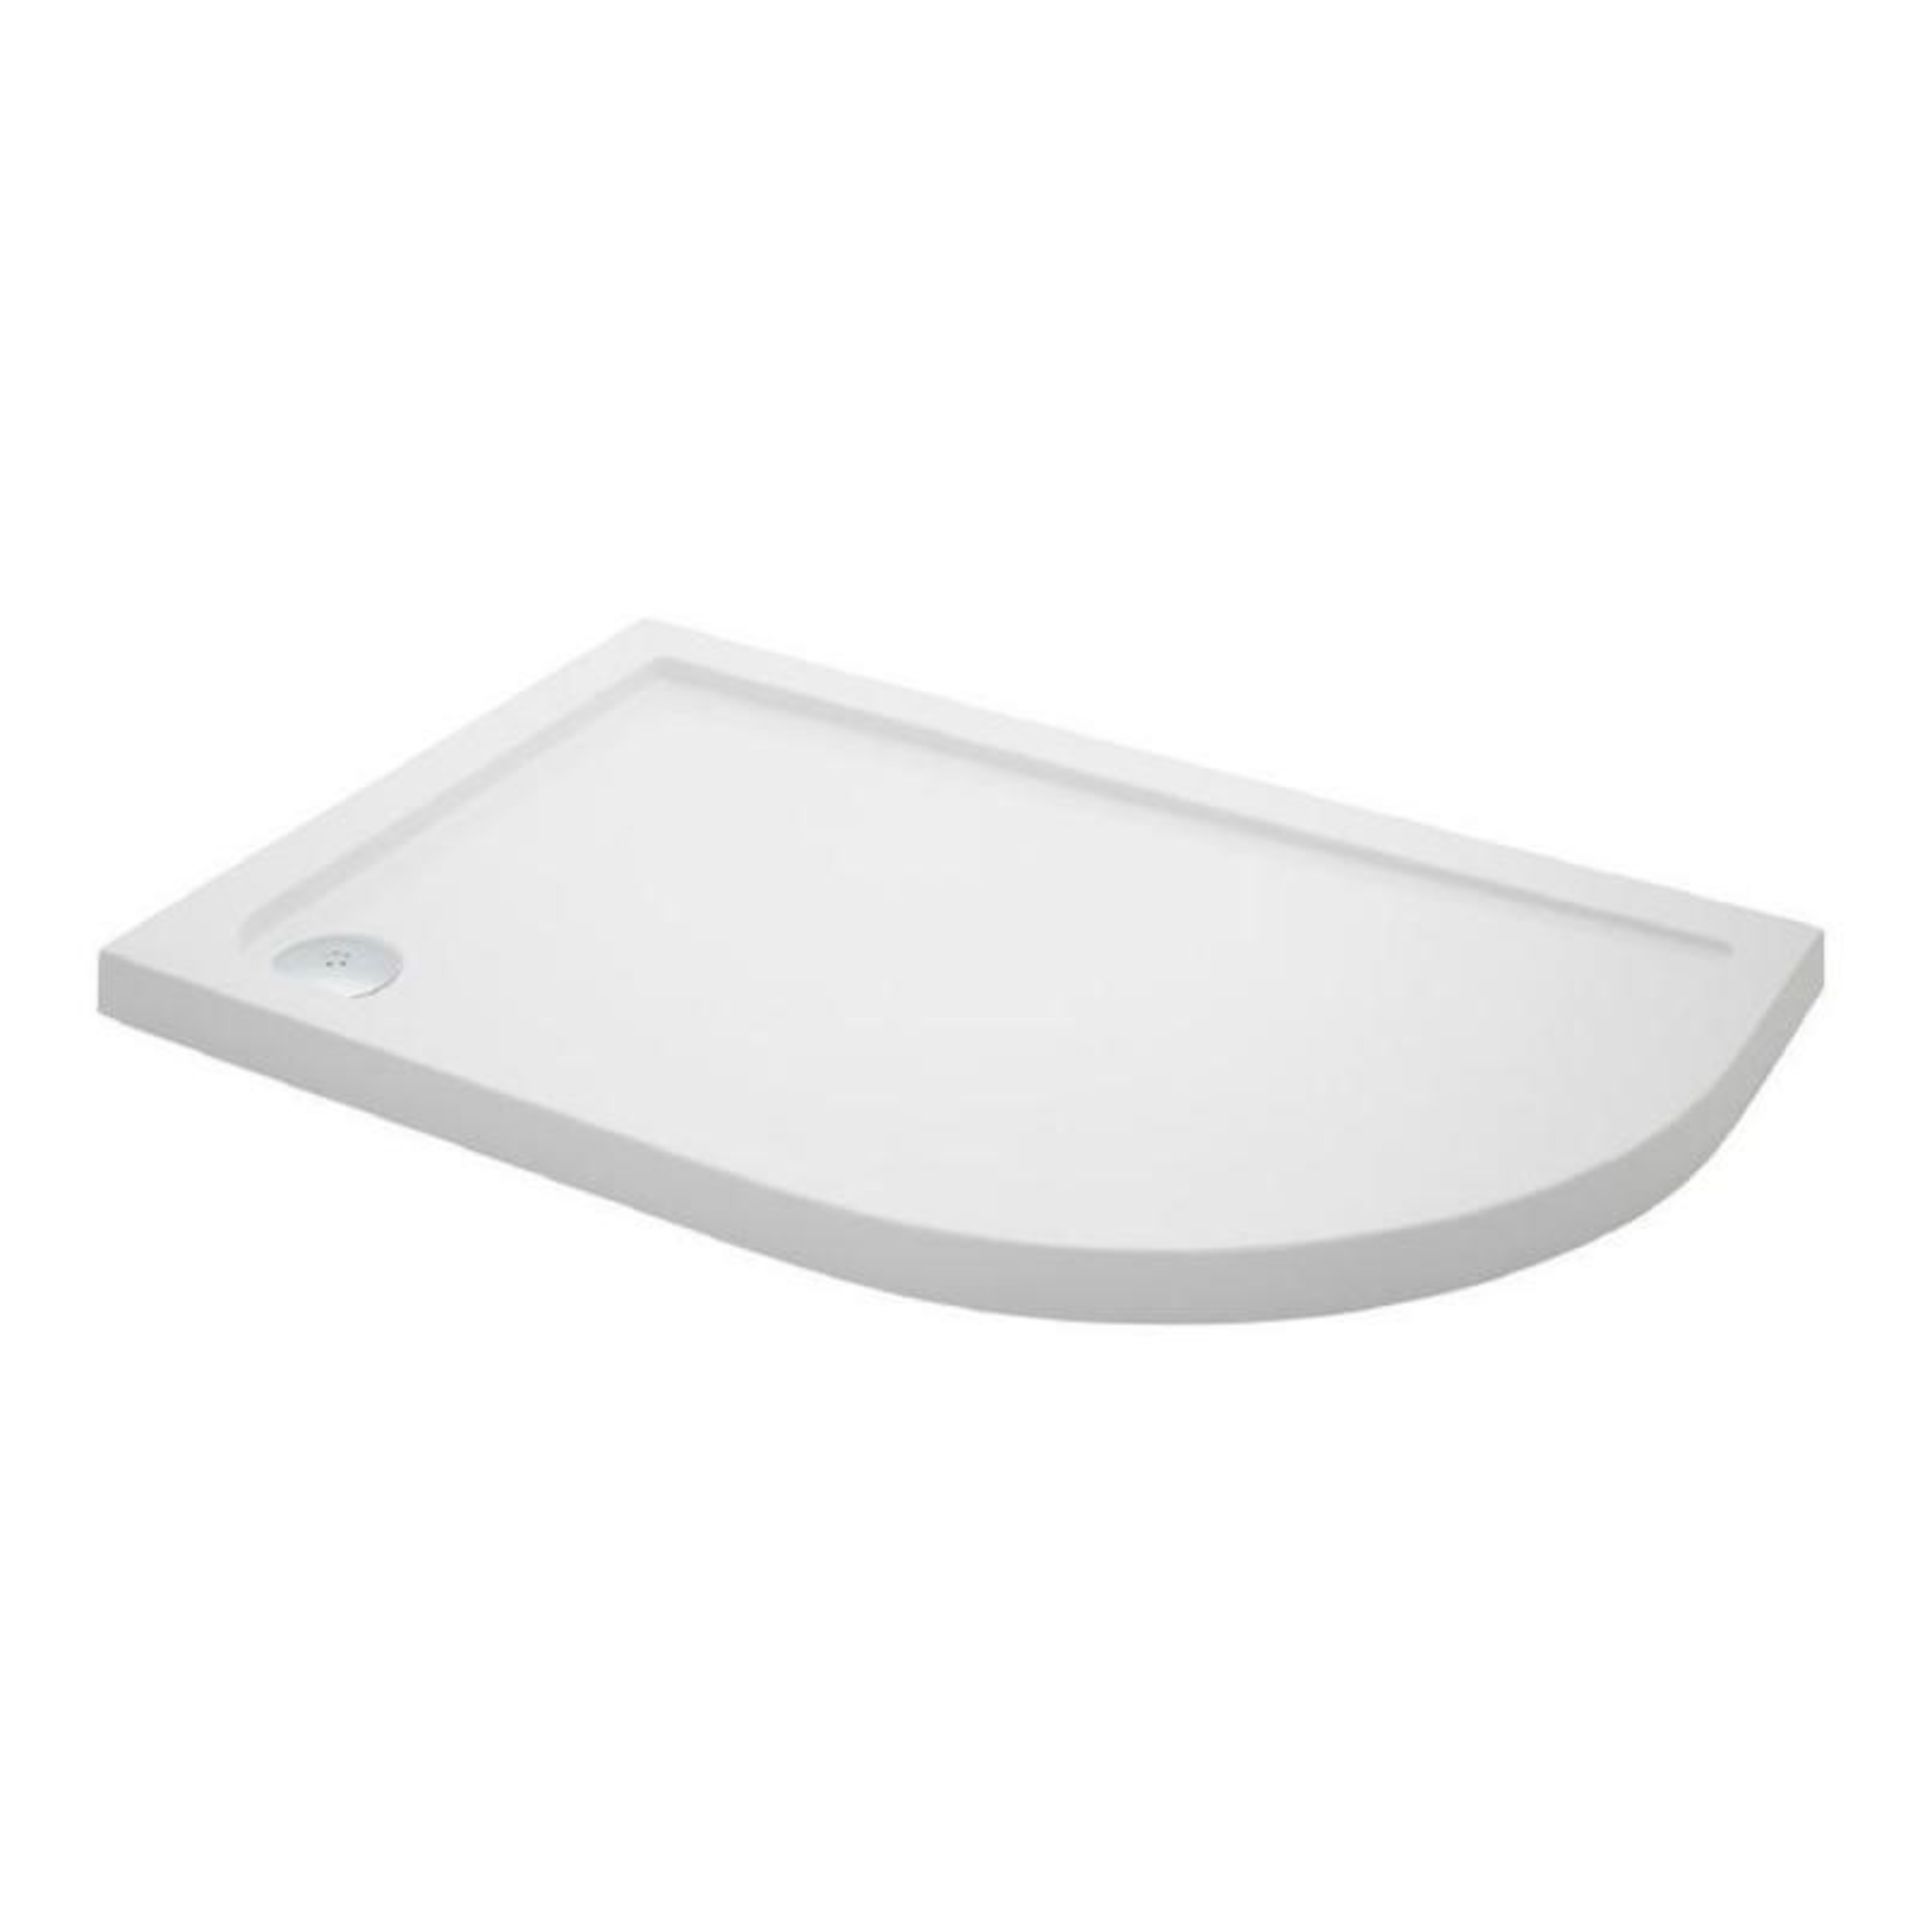 1 x White Pearlstone Right Hand Offset Quadrant Shower Tray 1200 x 900mm (NTP115) - New / Unused Sto